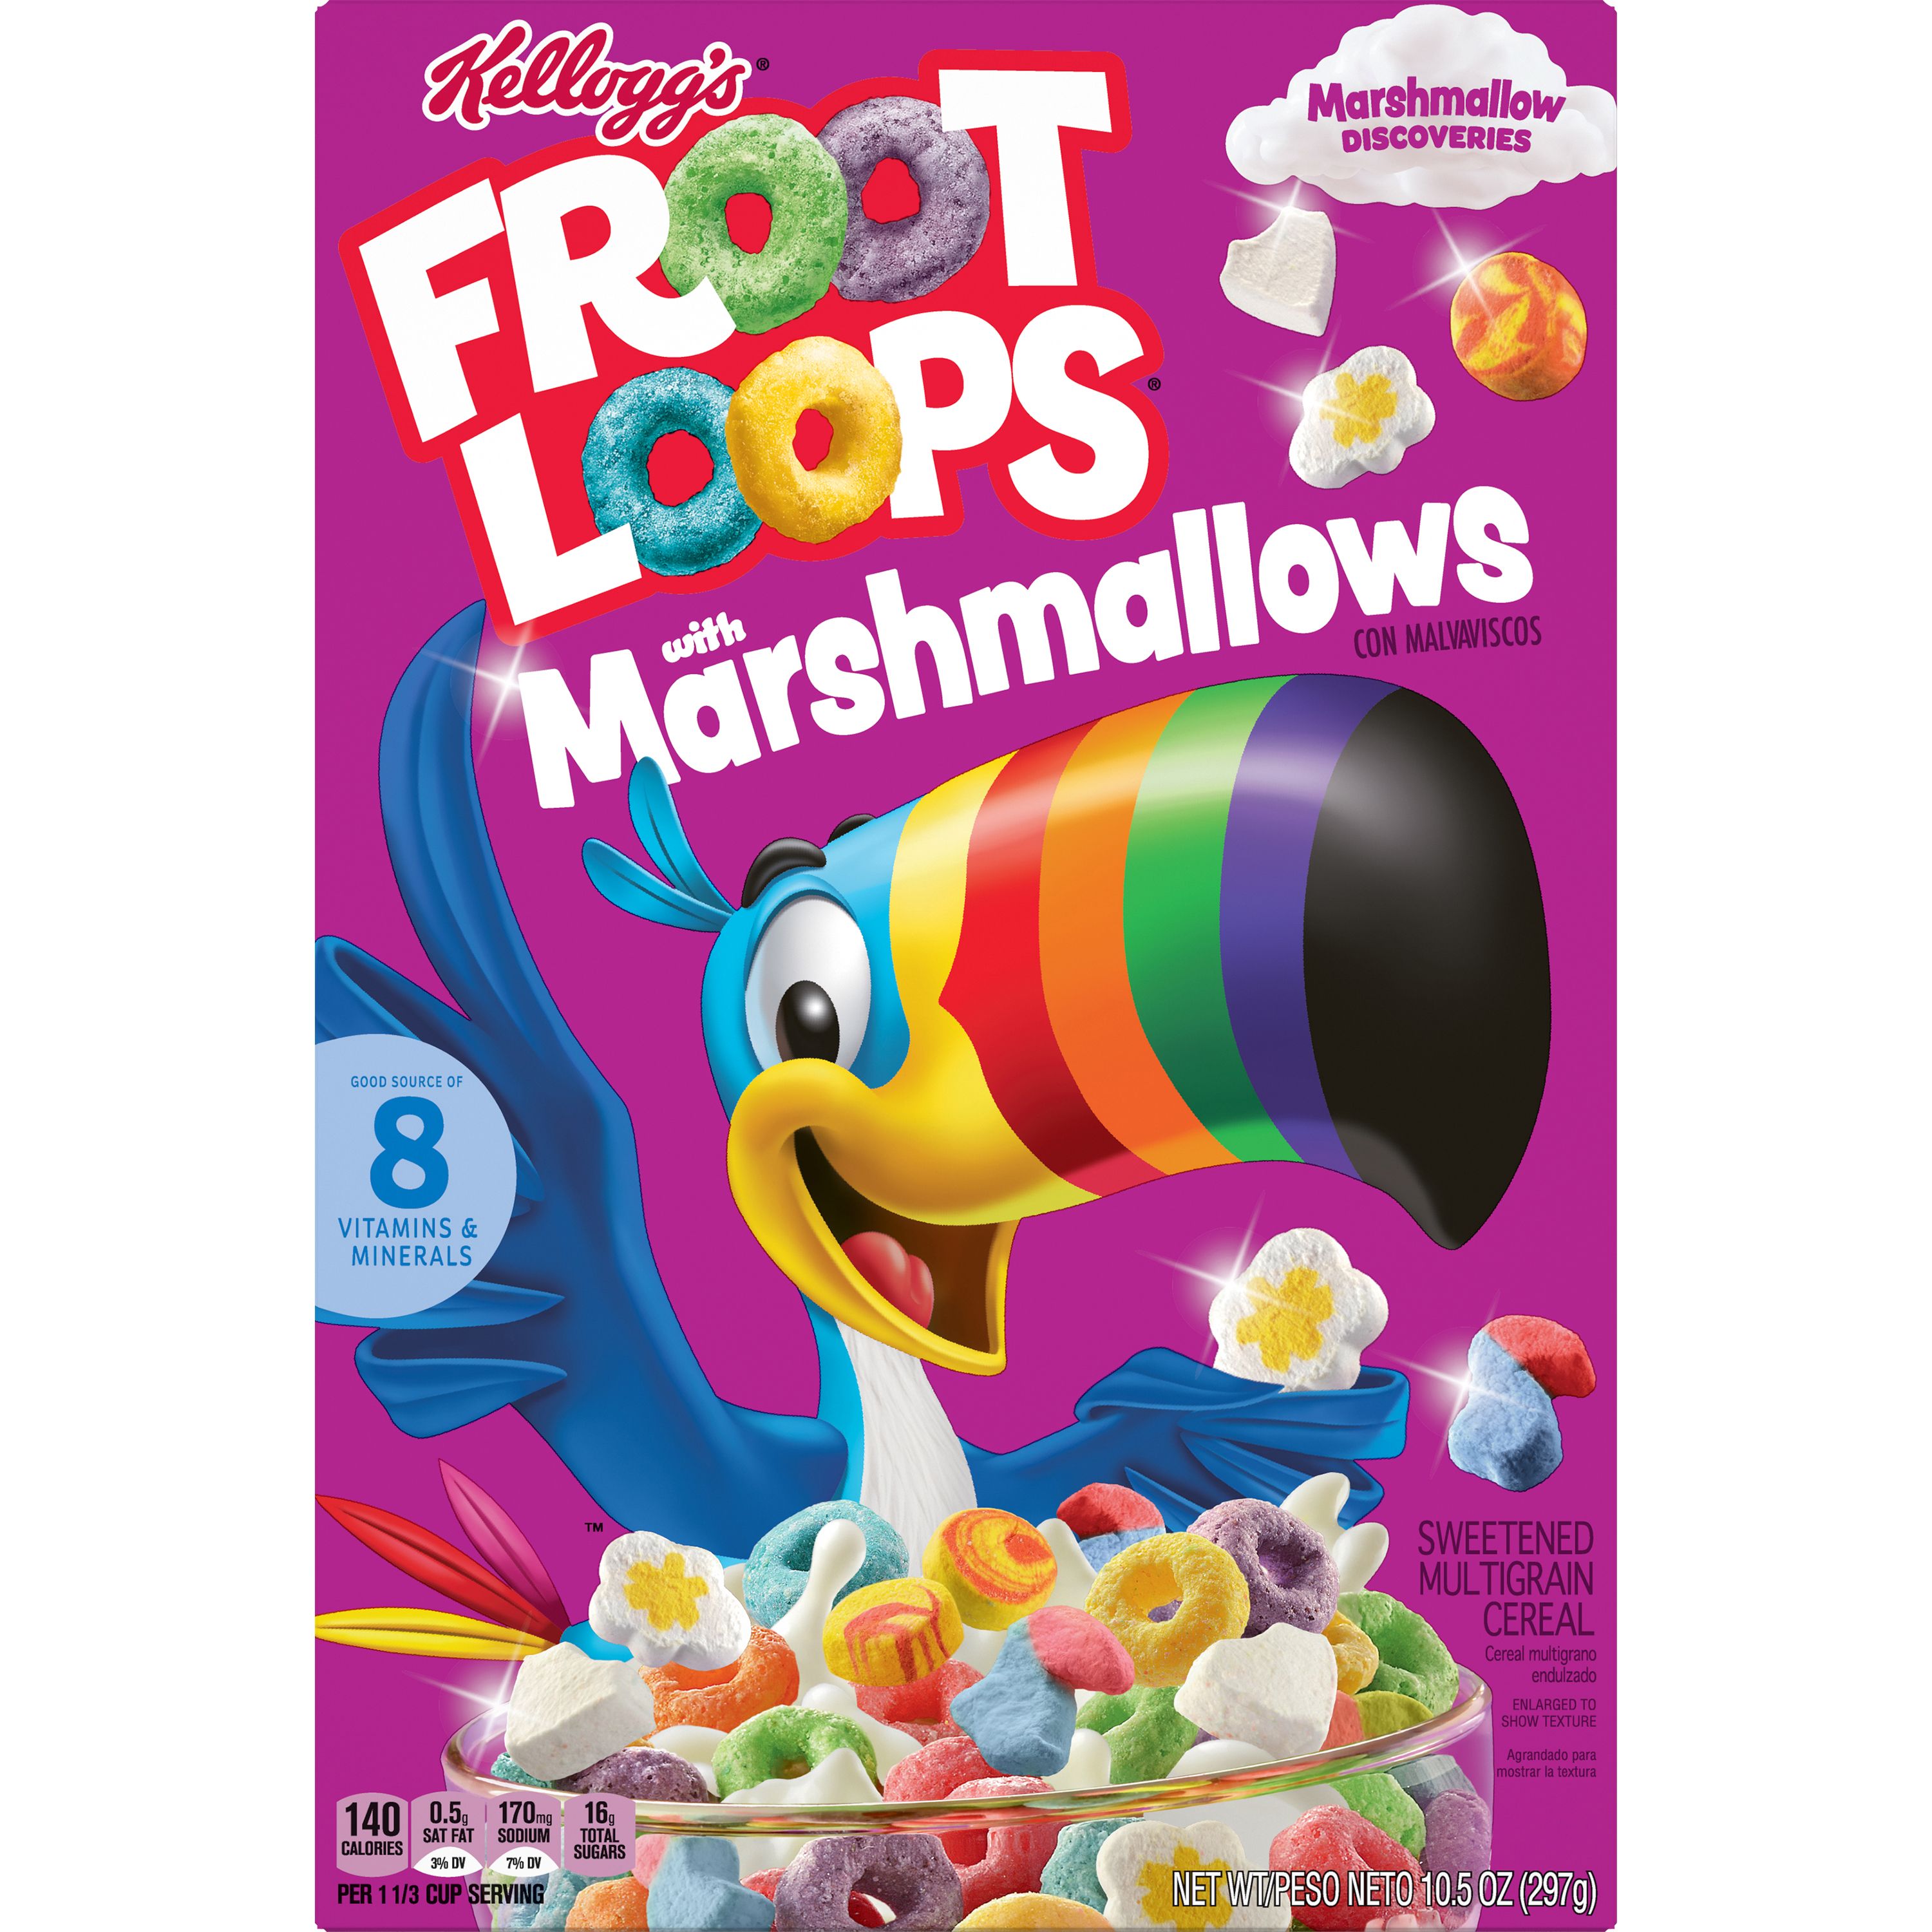 Kellogg’s® Froot Loops® with Marshmallows Cereal